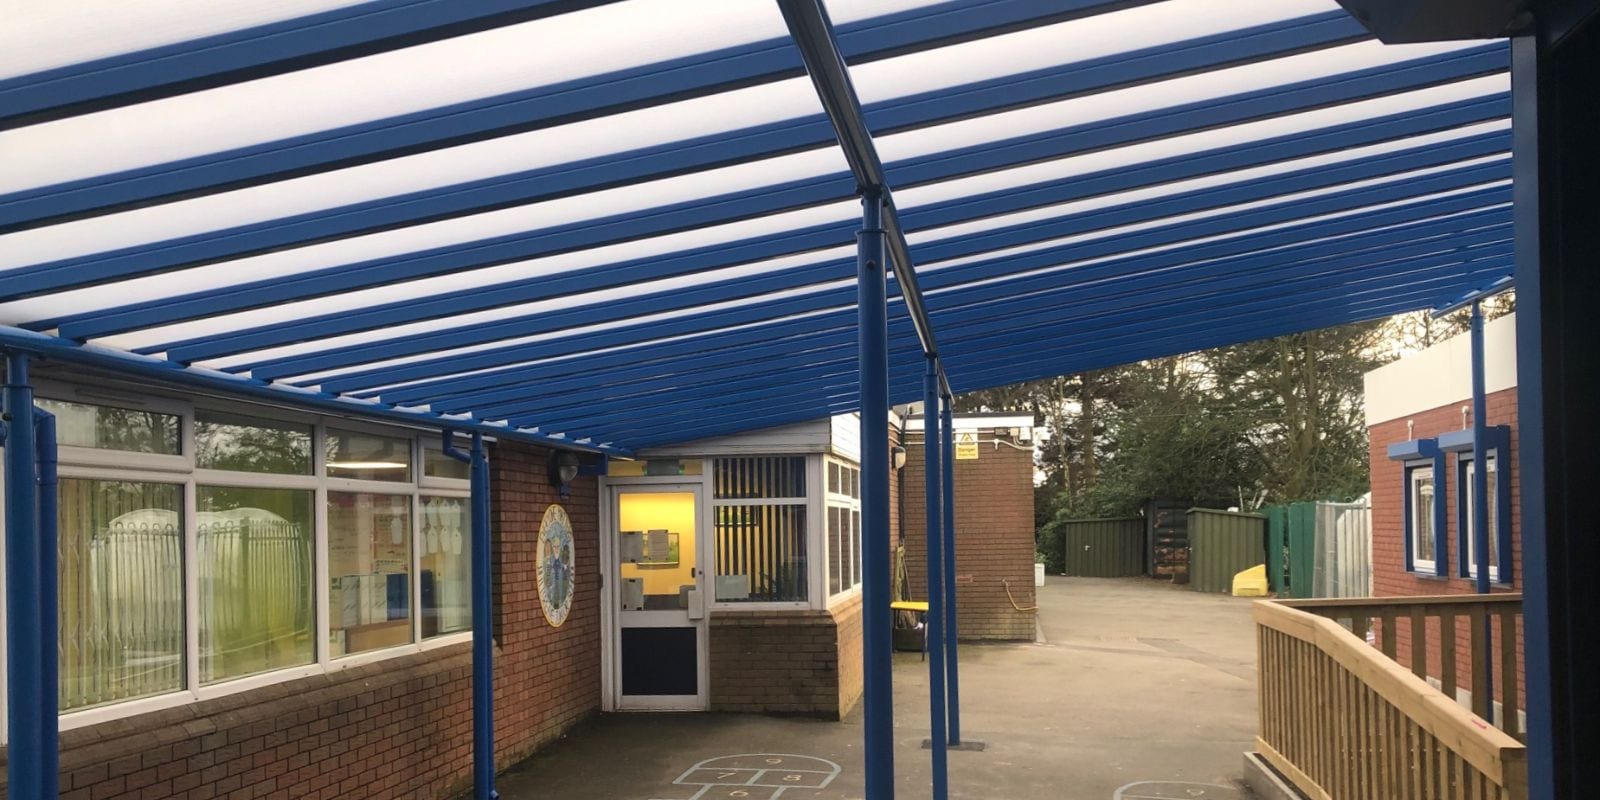 Covered walkway we installed at Whitgreave Primary School